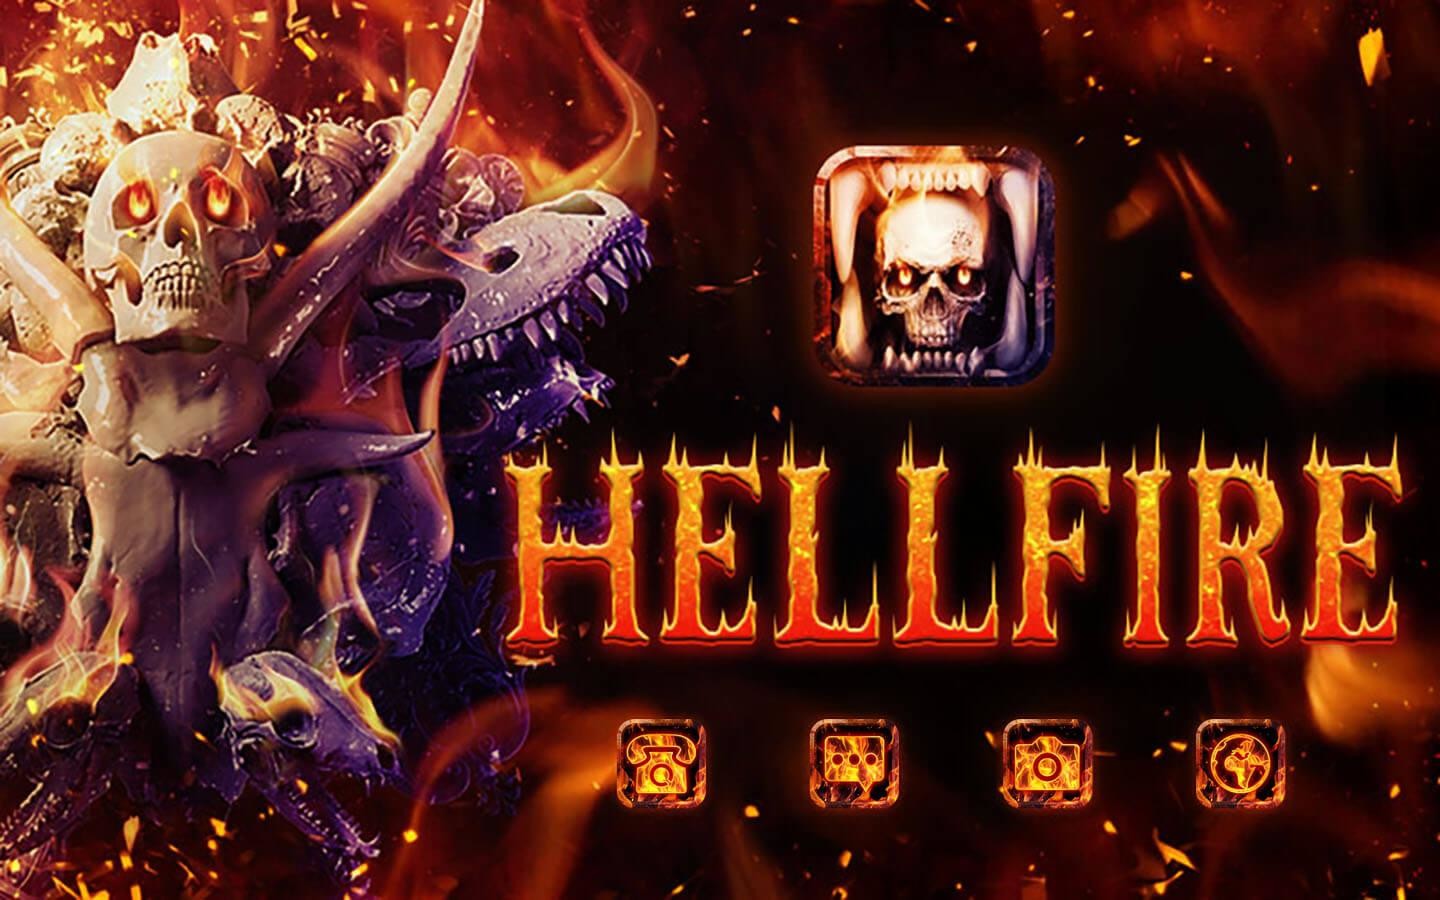 Hellfire club wallpaper by MADERUMMR  Download on ZEDGE  8fe9